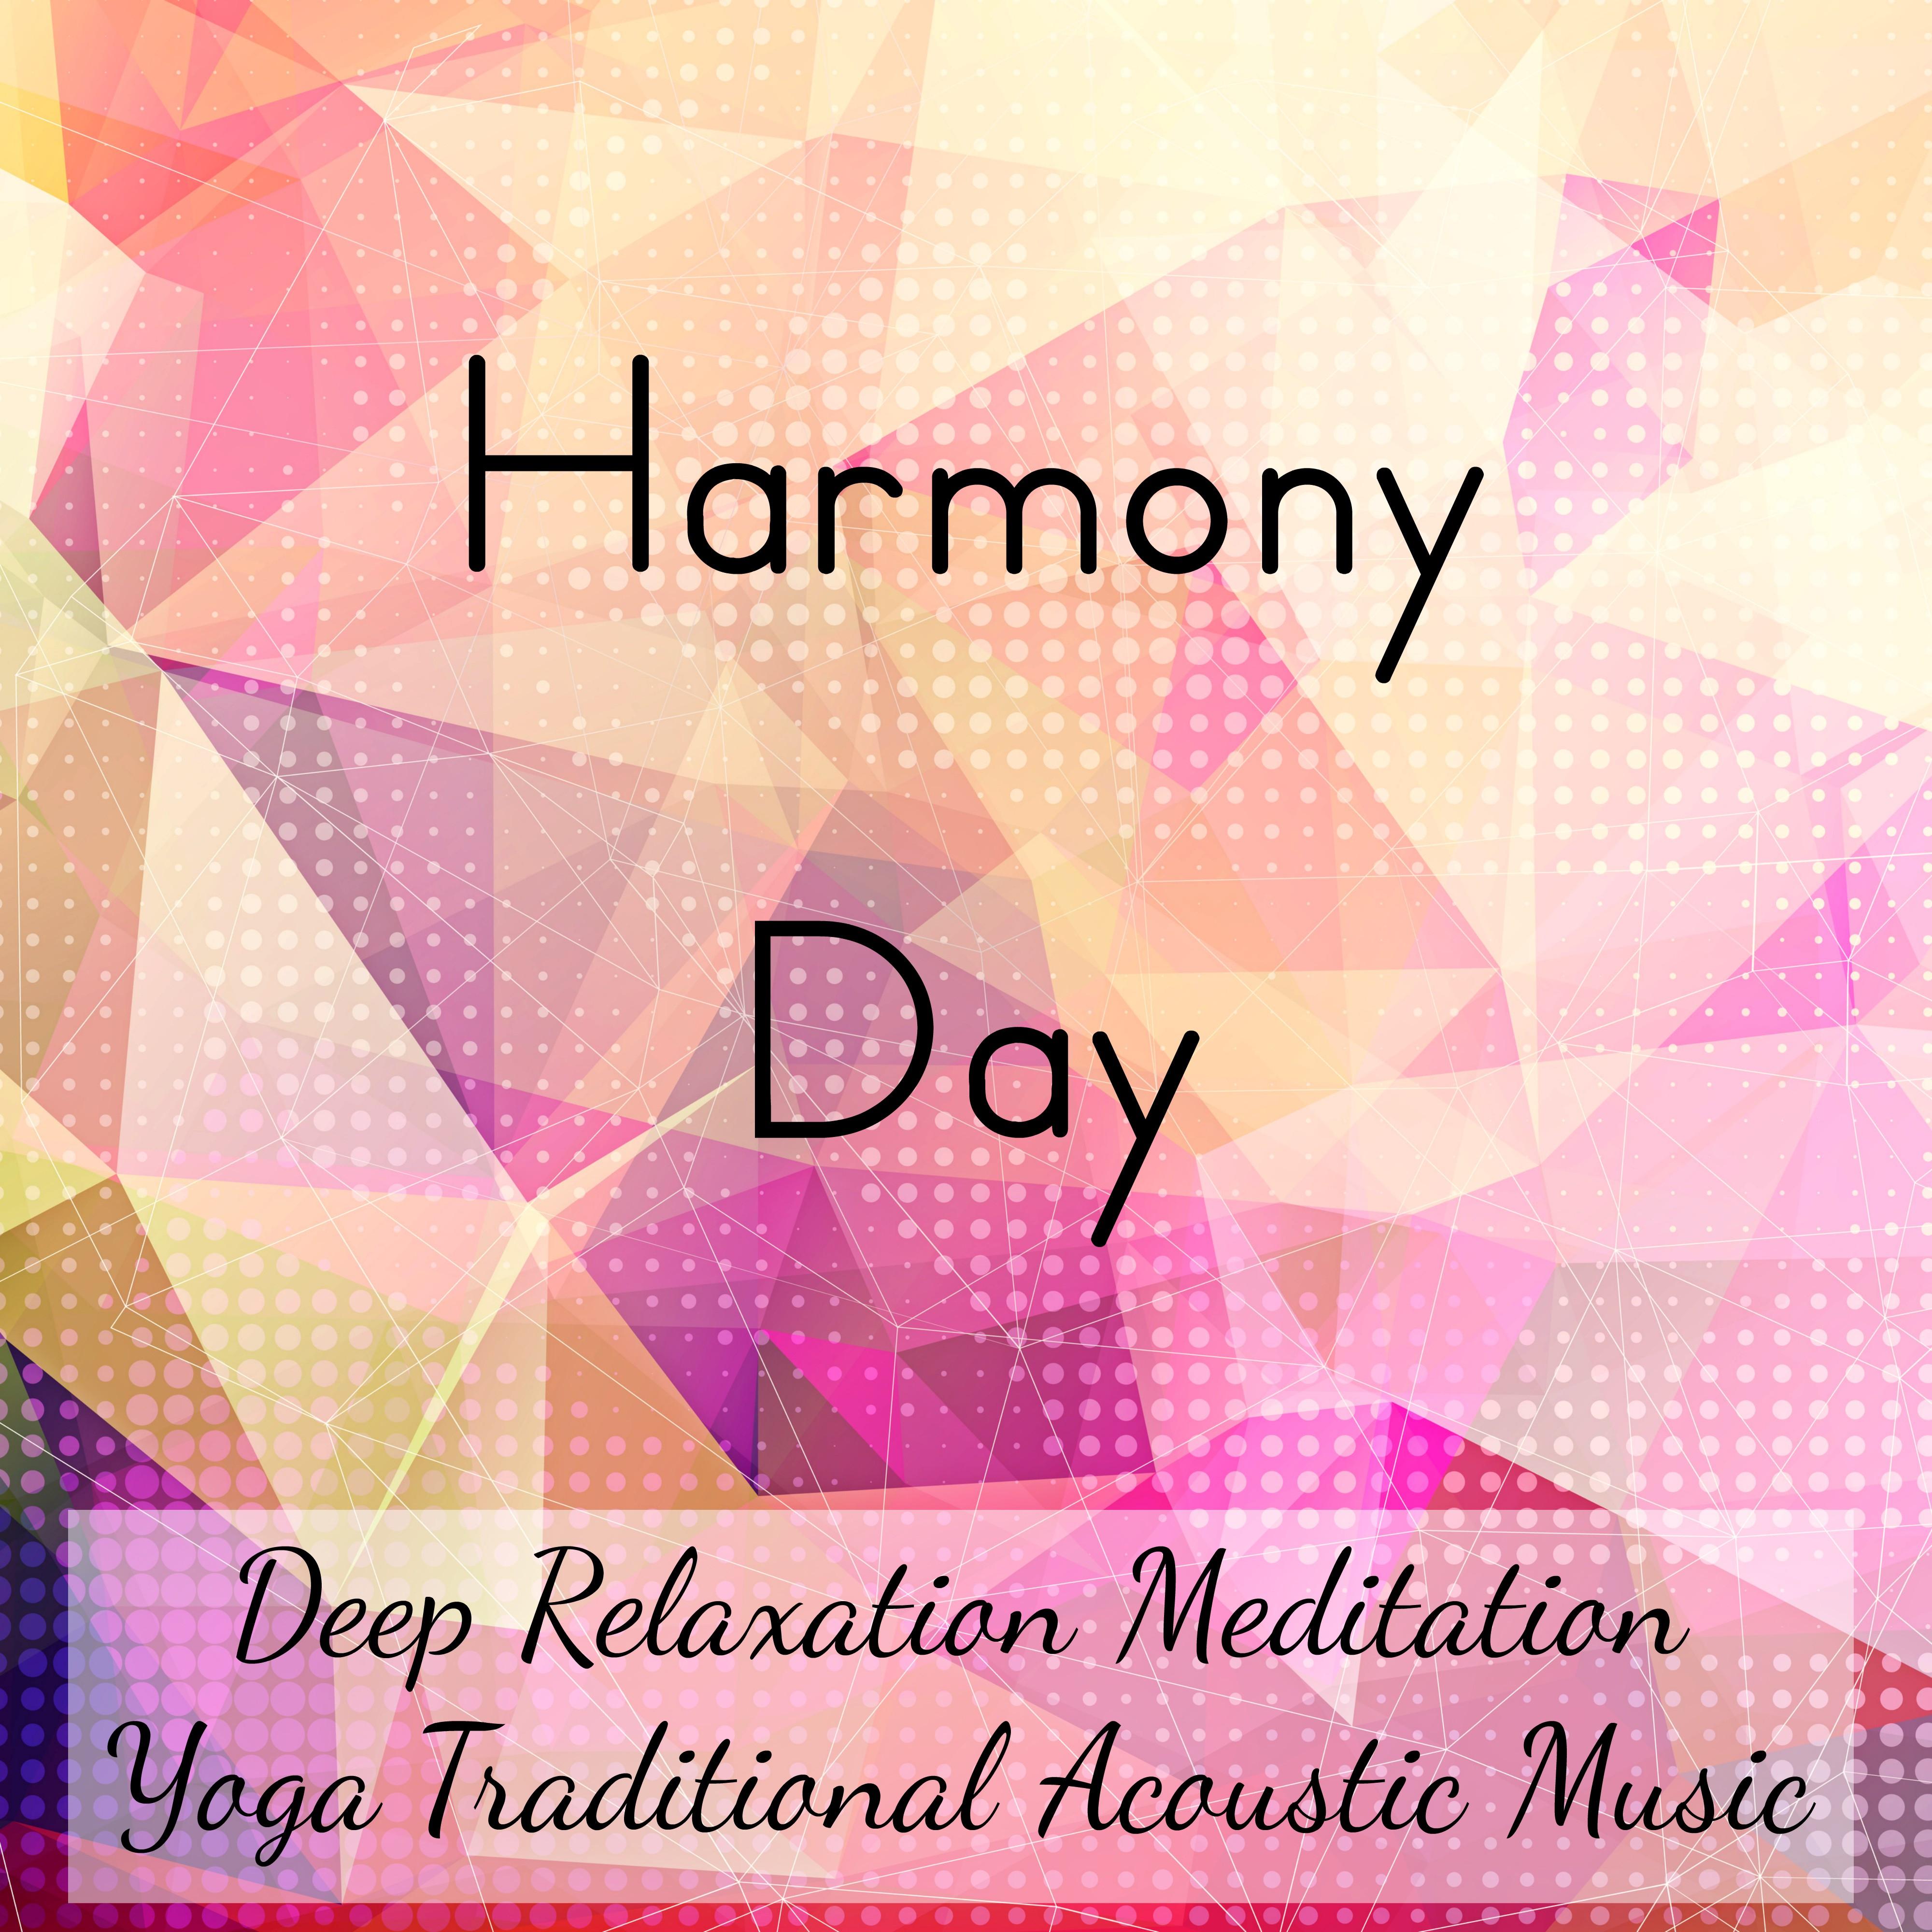 Harmony Day - Deep Relaxation Meditation Yoga Traditional Acoustic Music with new Age Instrumental Sounds